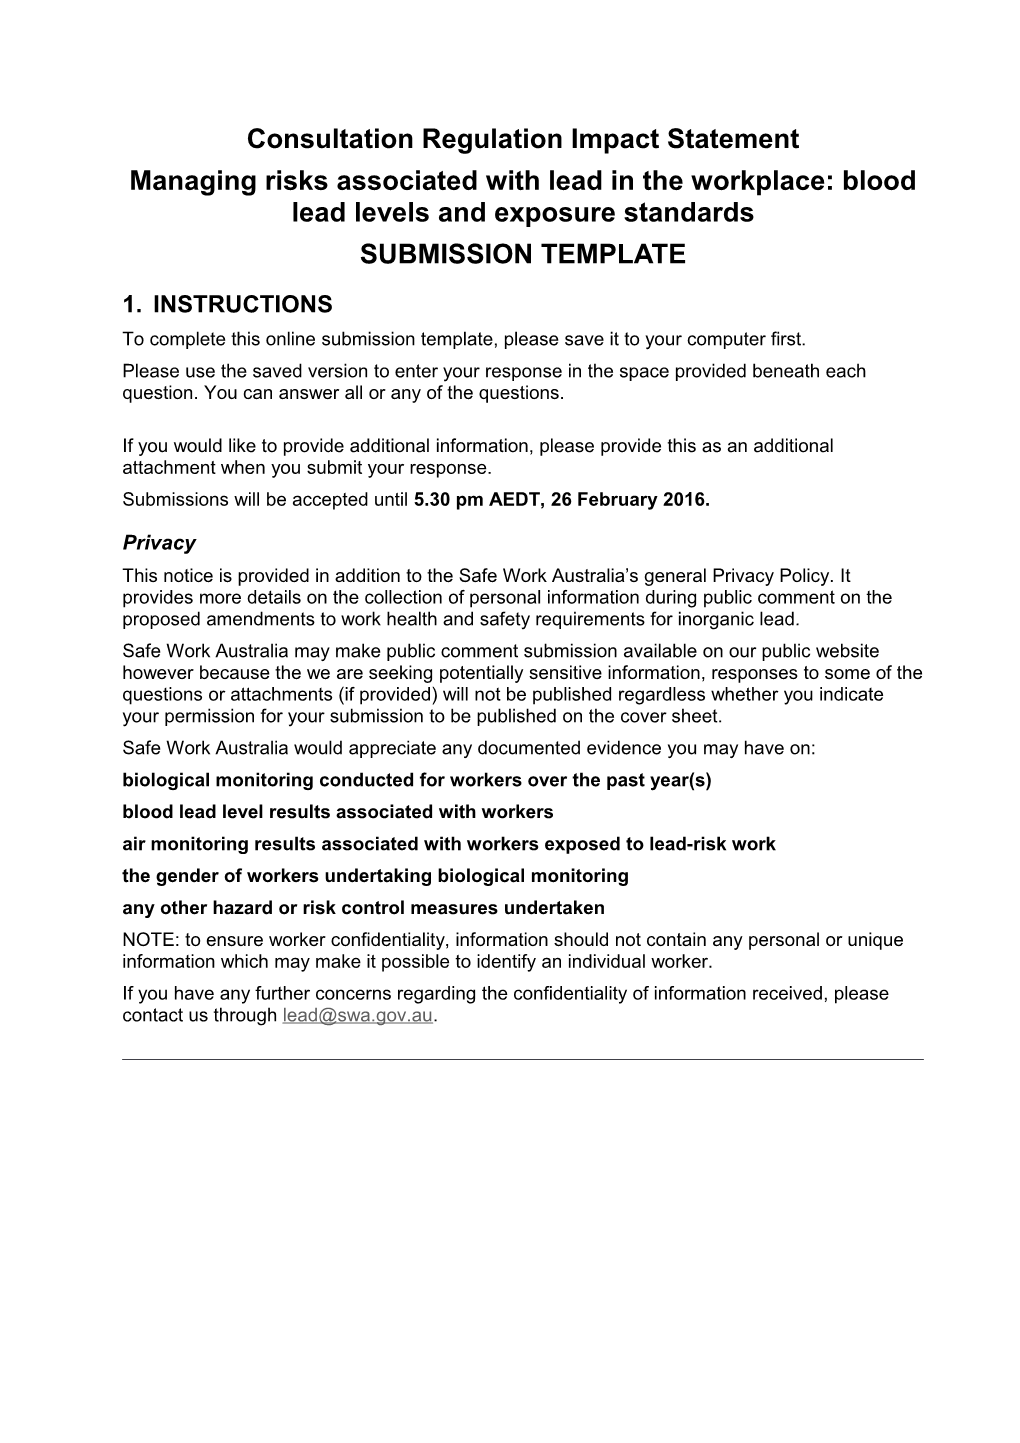 Submission Template Lead RIS